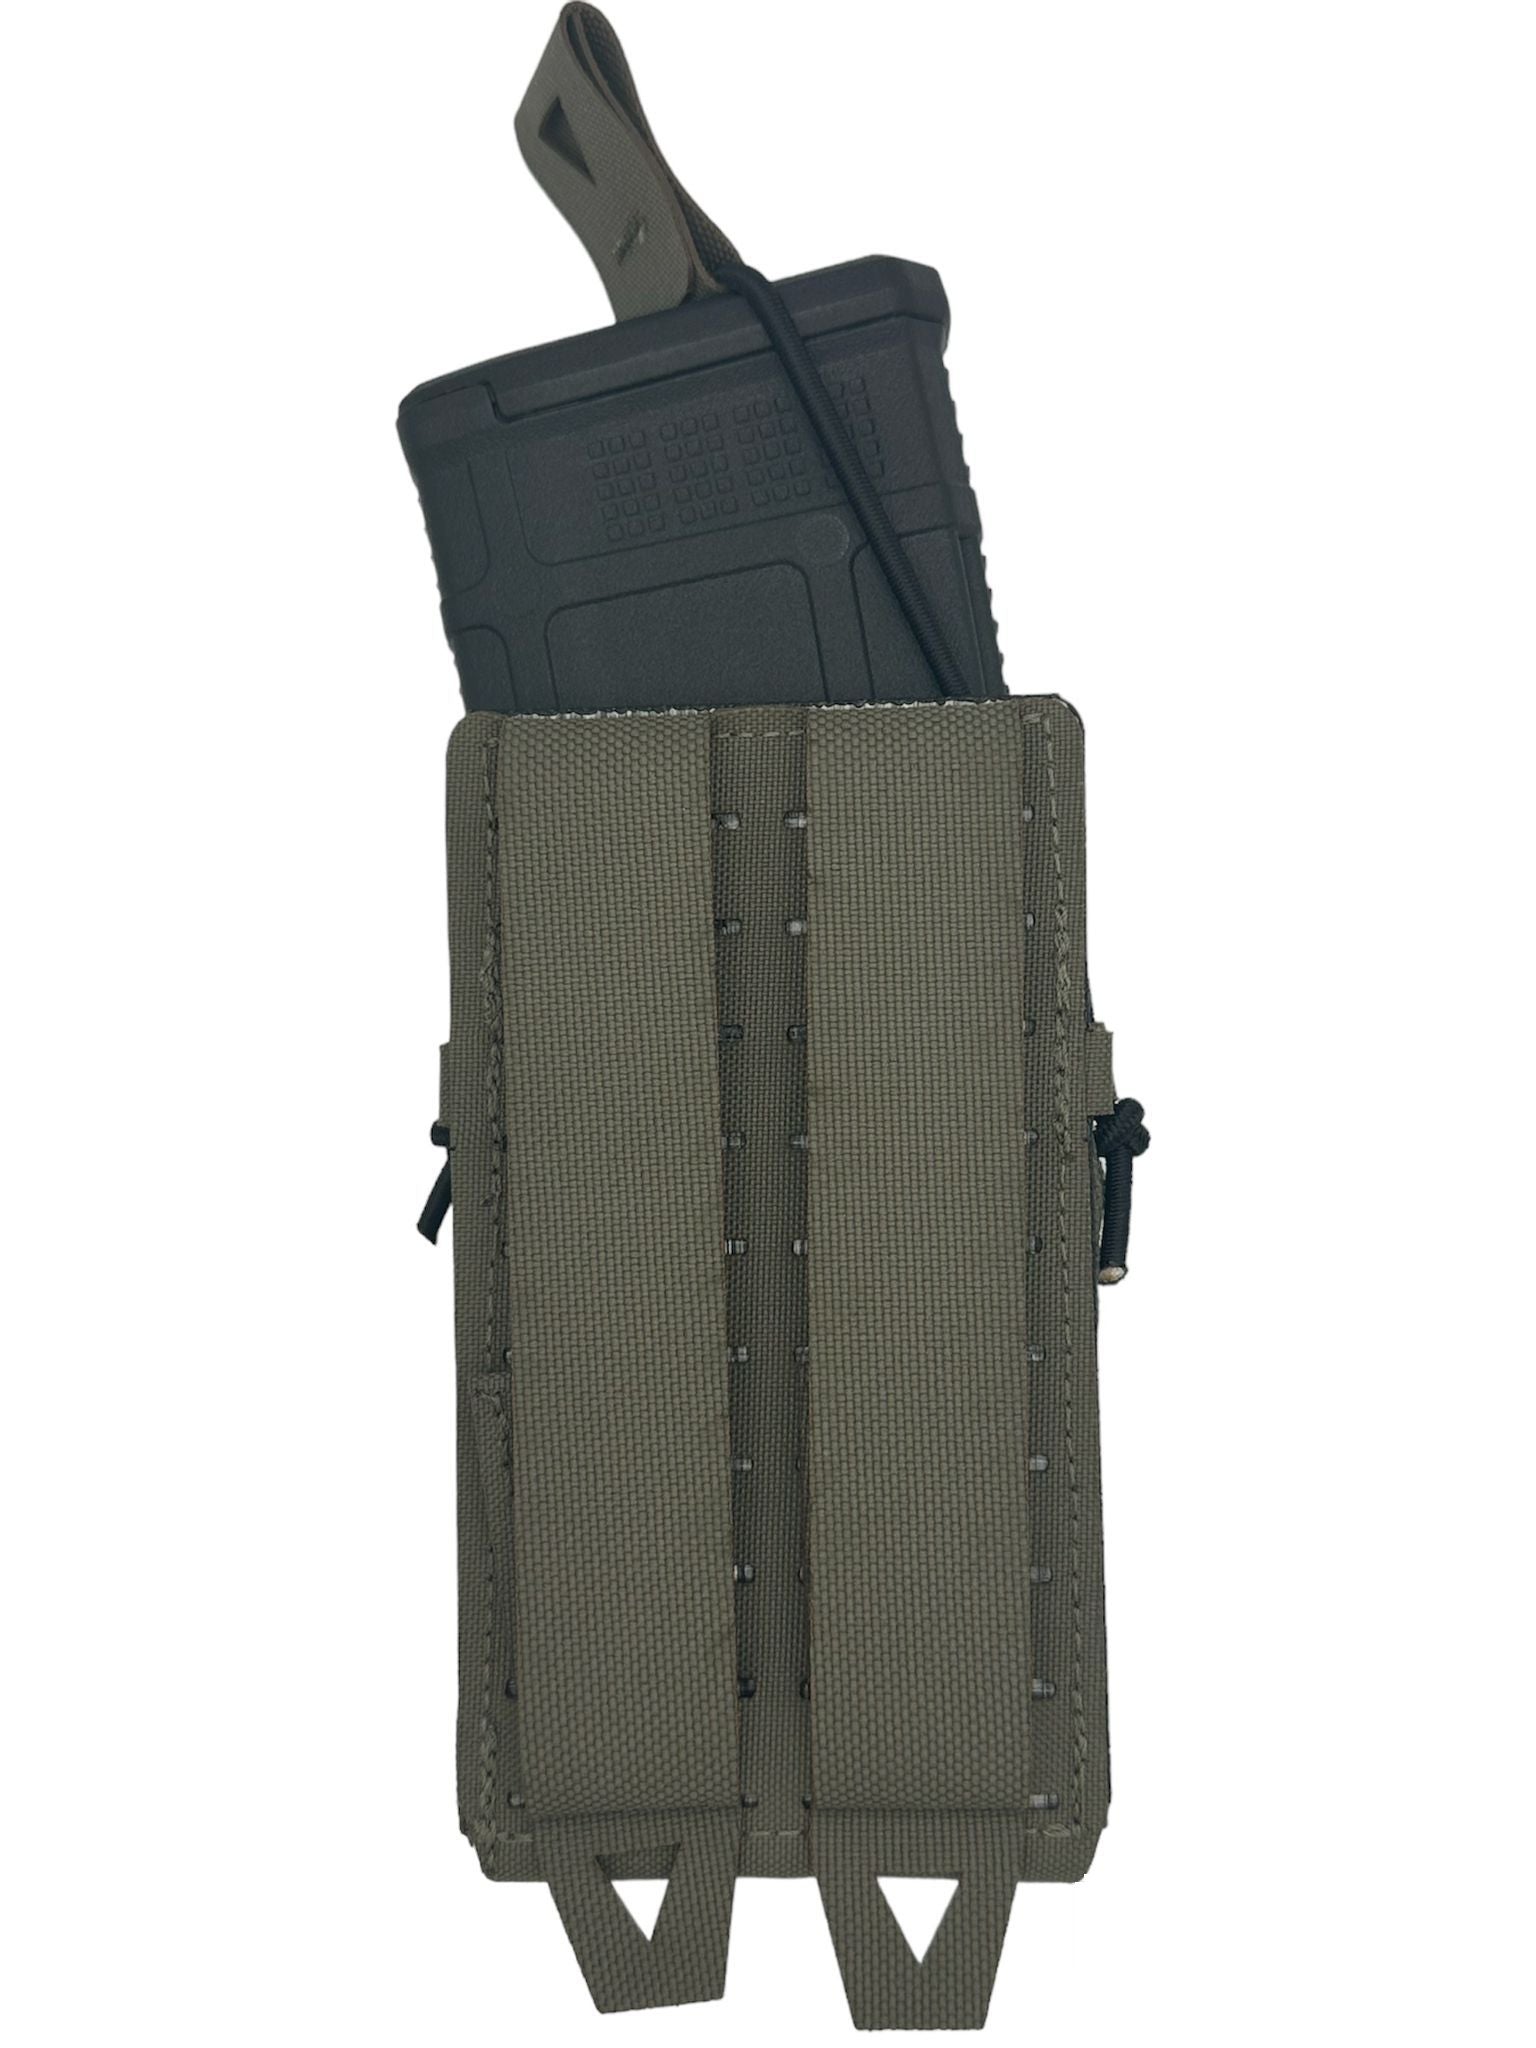 4-14 - Fast Rifle Mag Pouch - Ranger Green